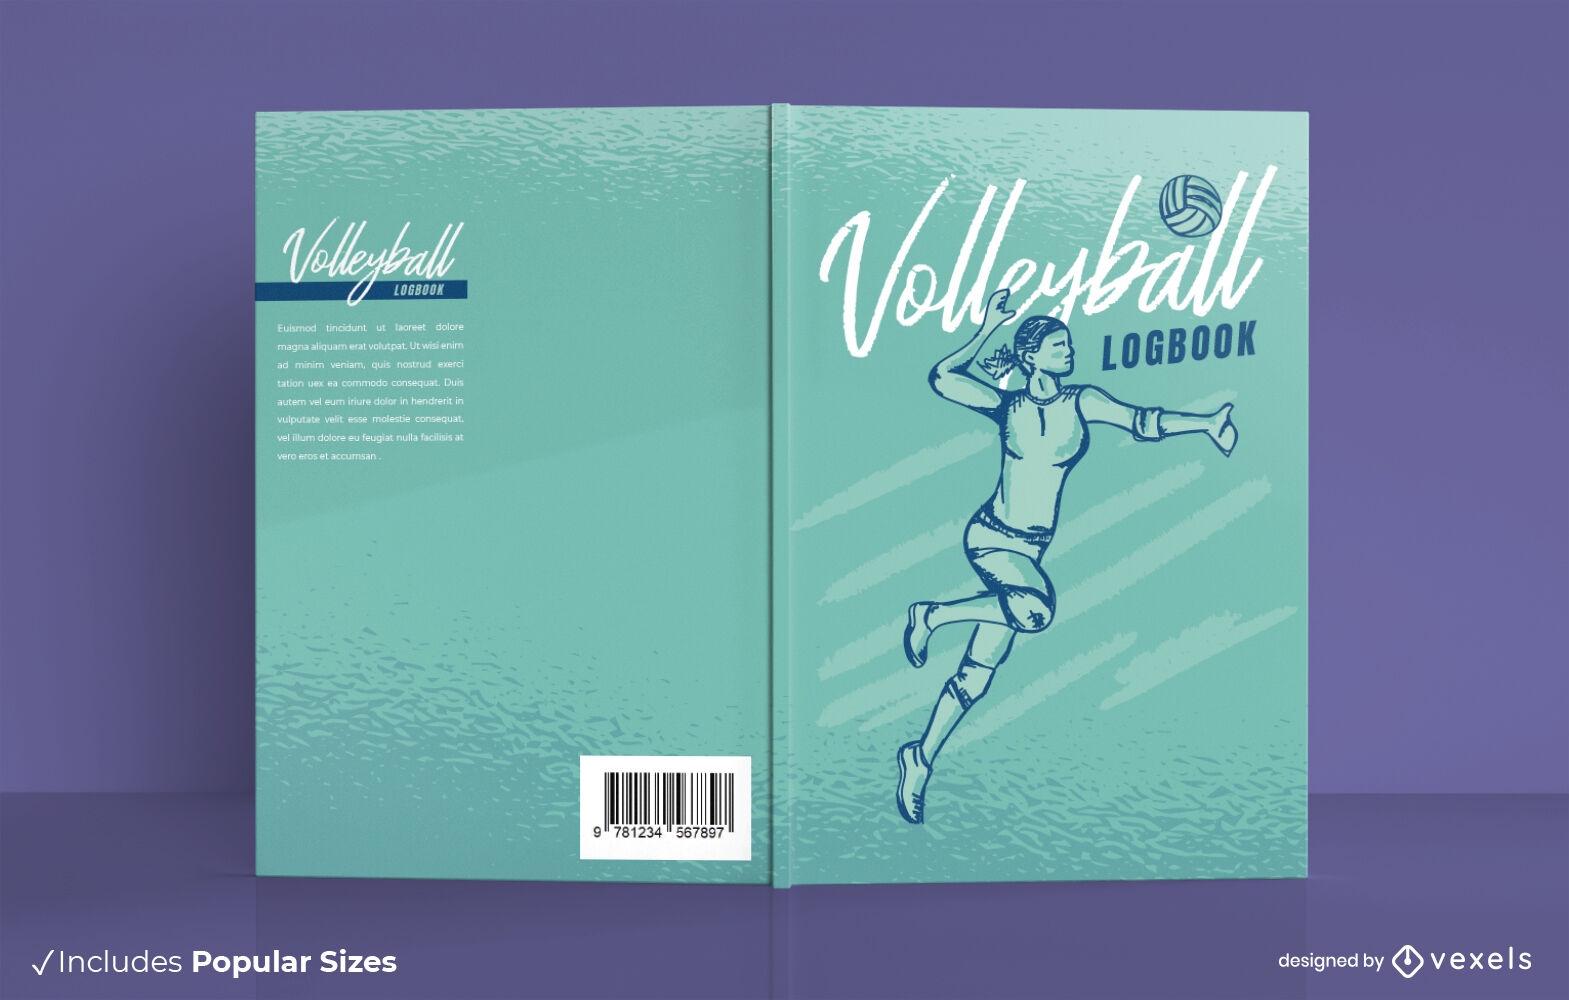 Volleyball logbook book cover design